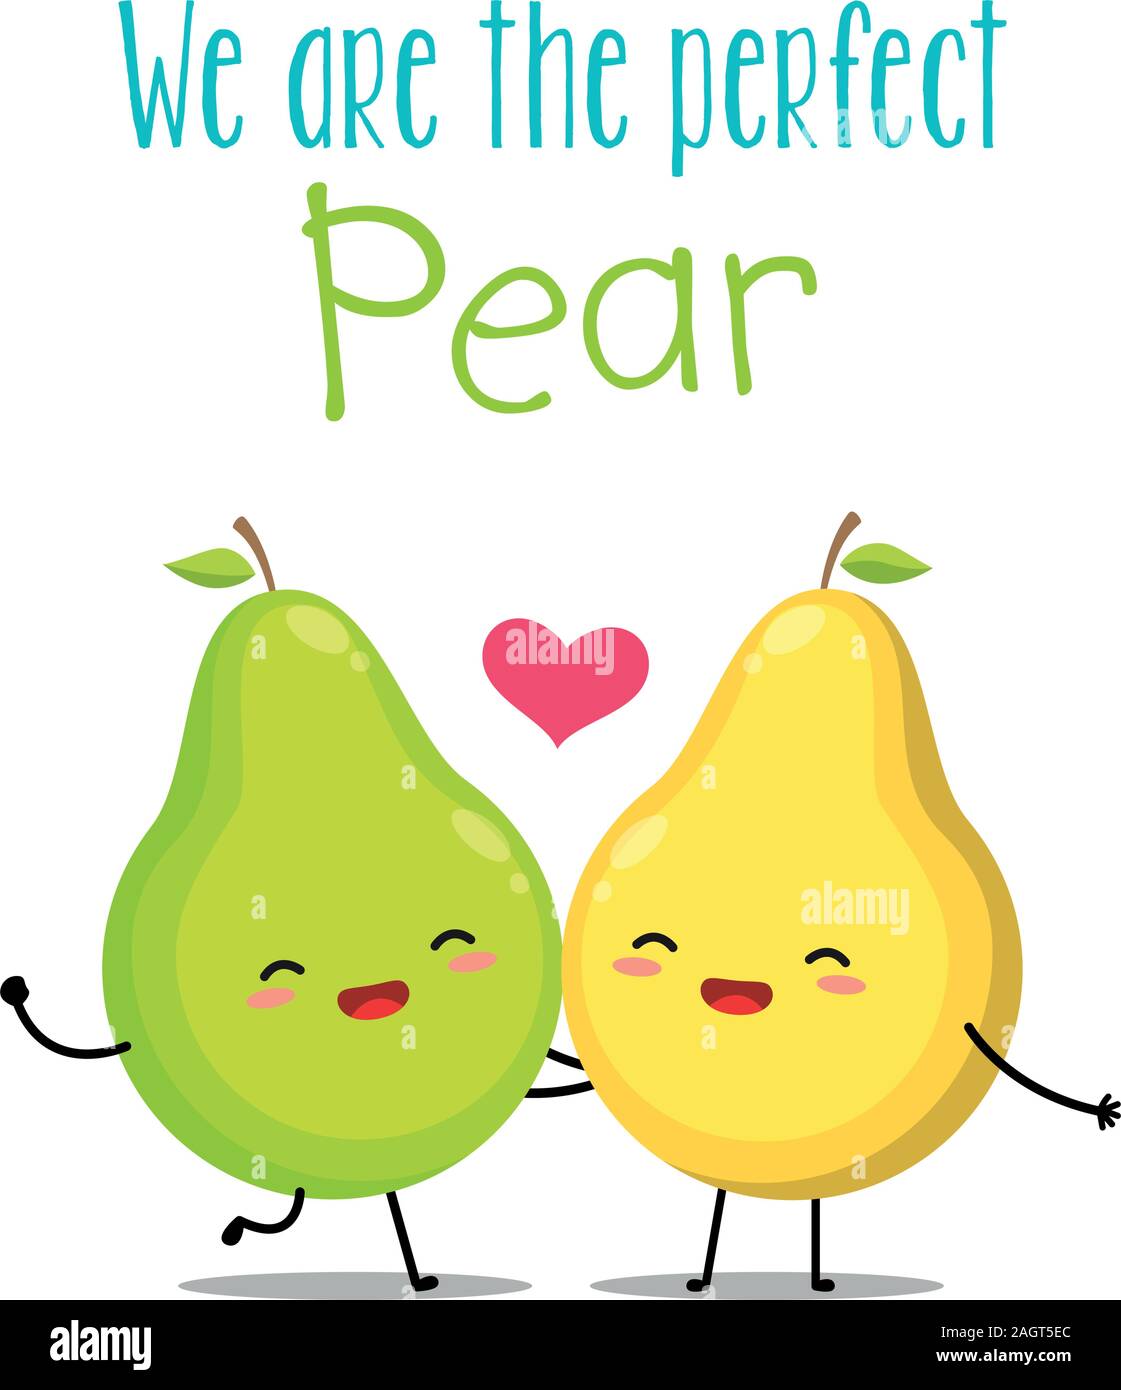 The happy perfect pear. Vector Illustration Stock Vector